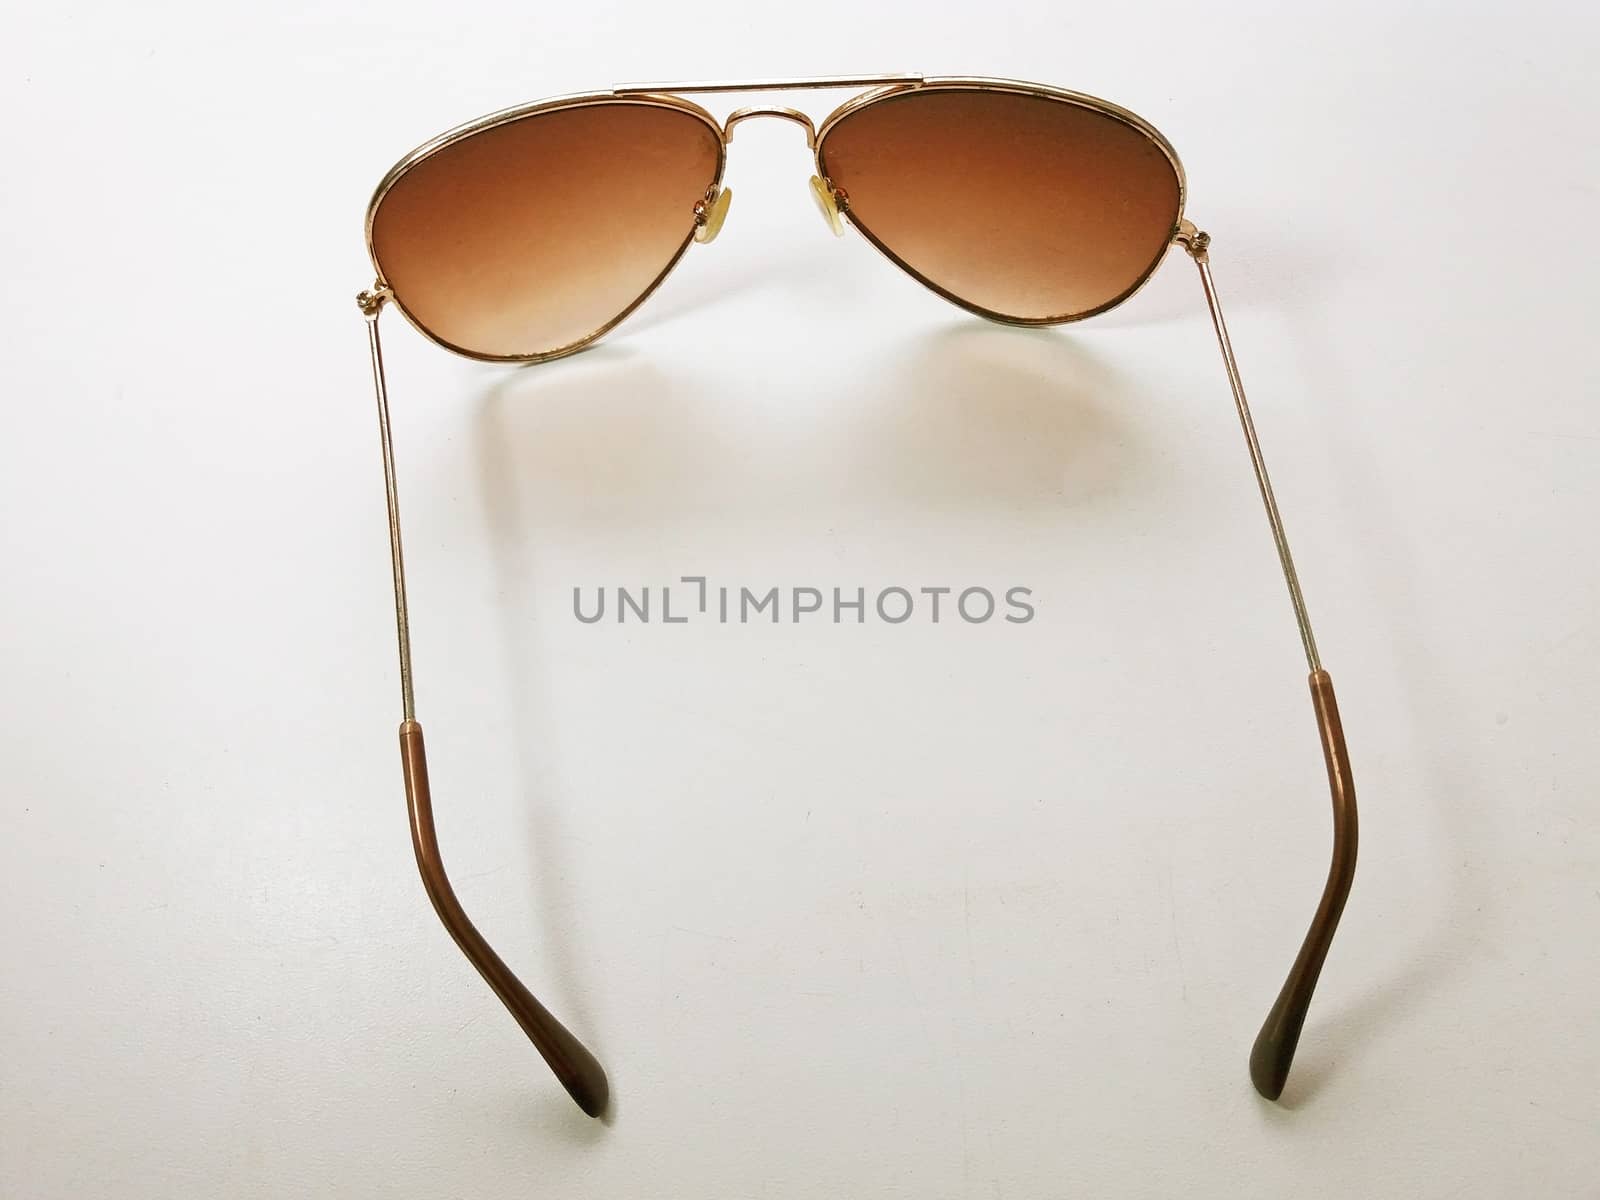 Sunglasses on white background for summer, sea. by Mindru